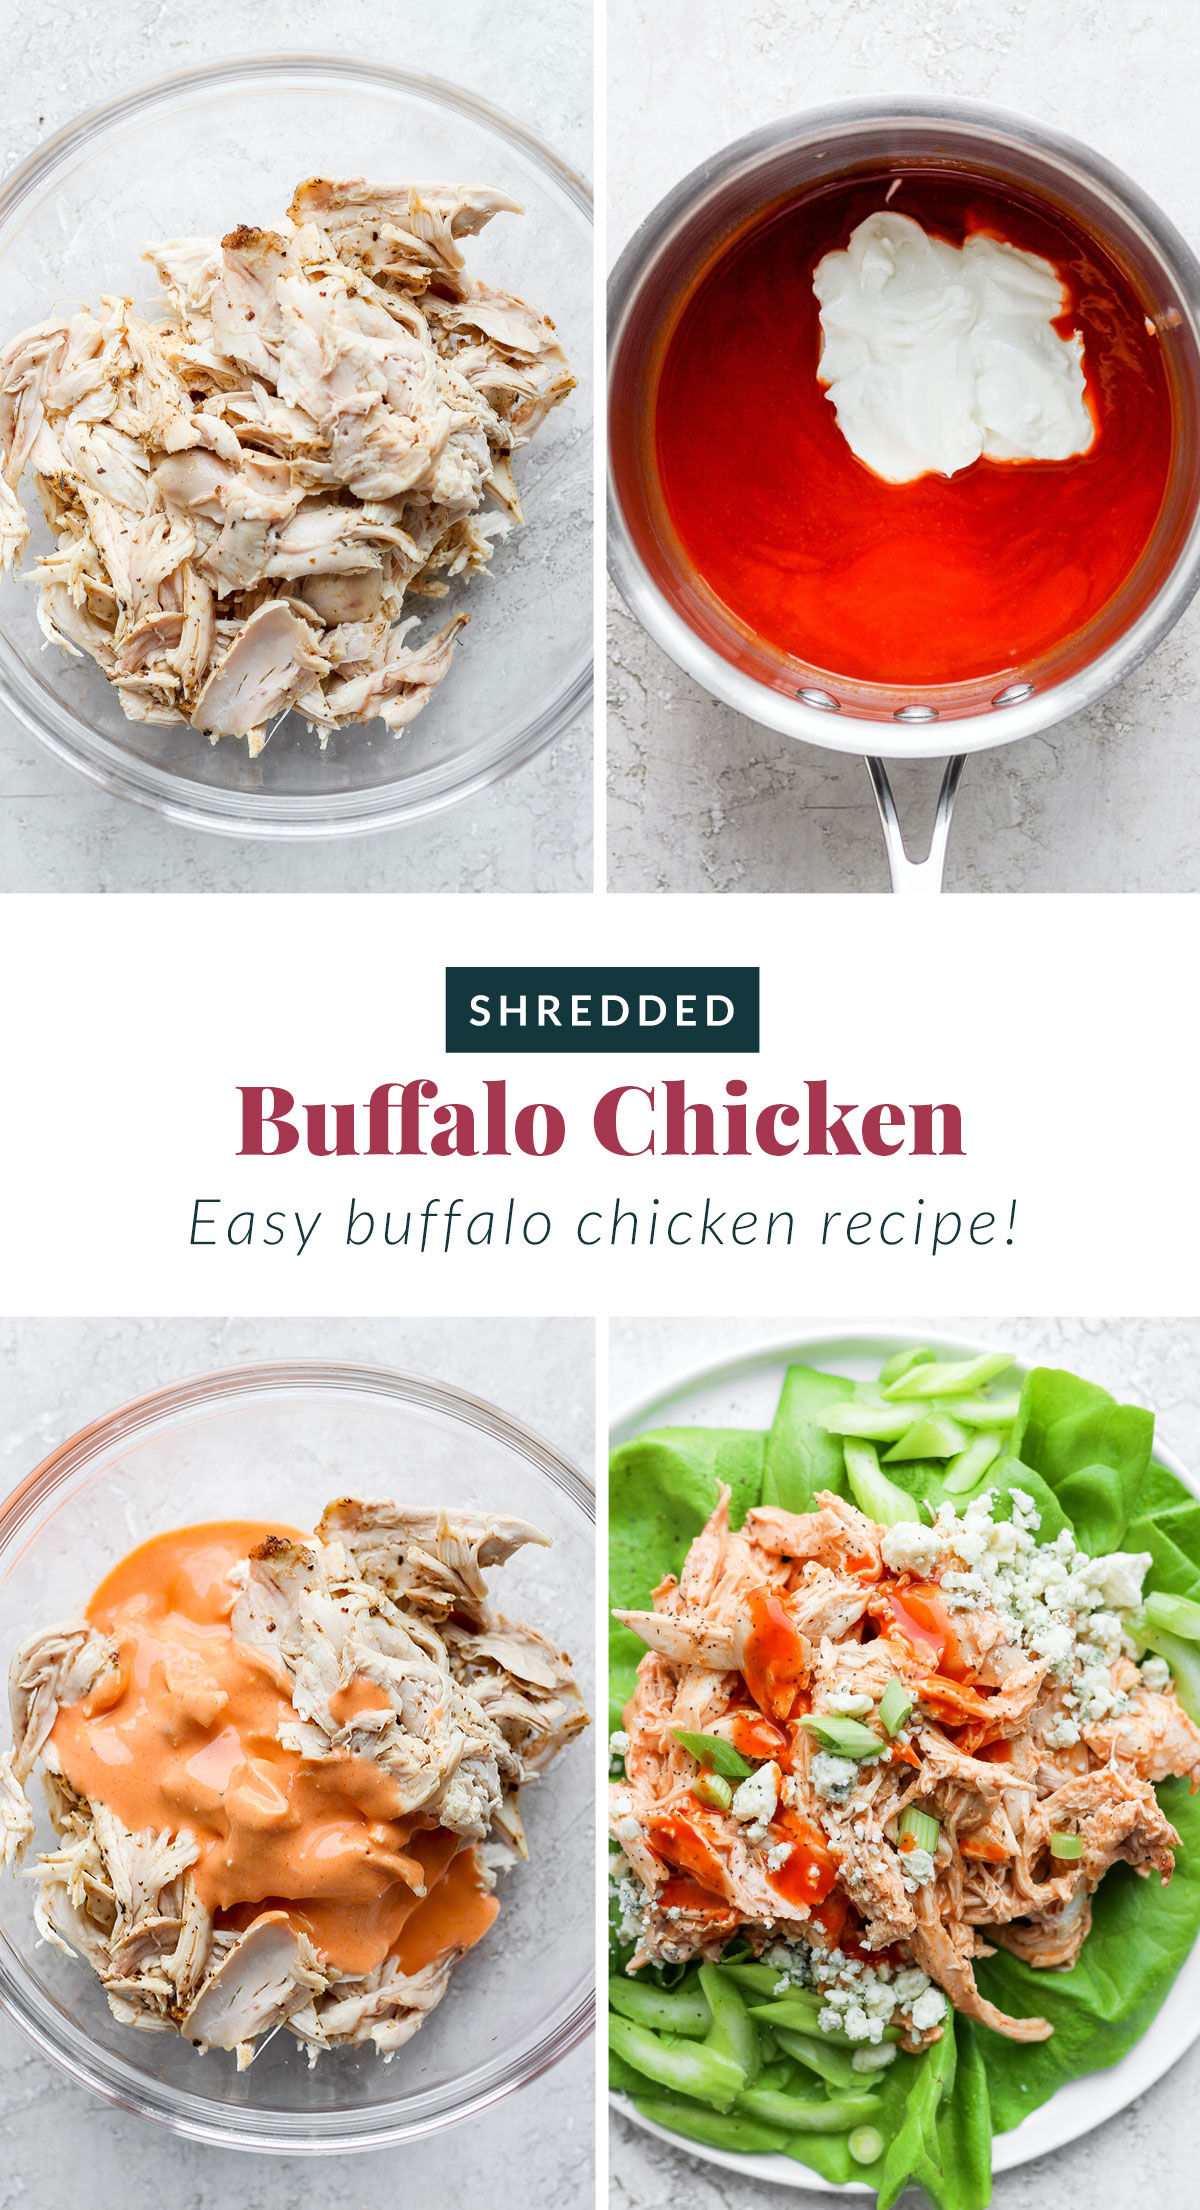 Buffalo Chicken Recipe (4 Ingredients!) - Fit Foodie Finds